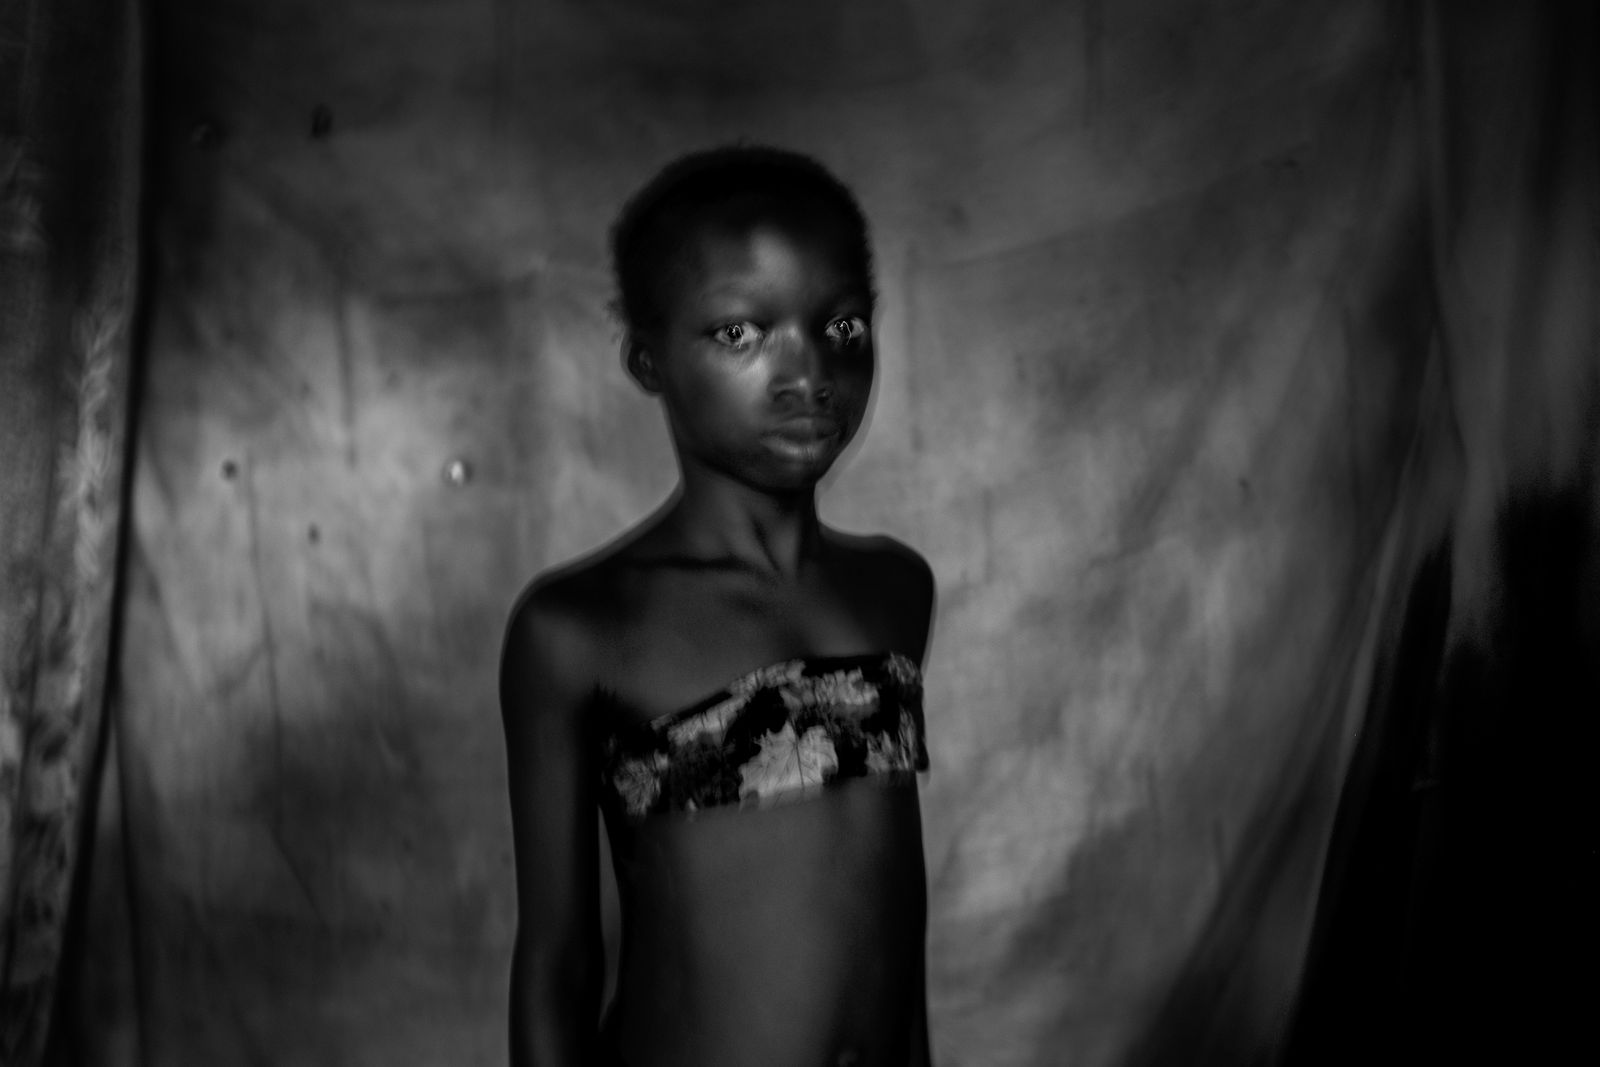 © Heba Khamis - Suzanne, 11 years old, experienced breast ironing couple of months before that image until her breast totally gone.